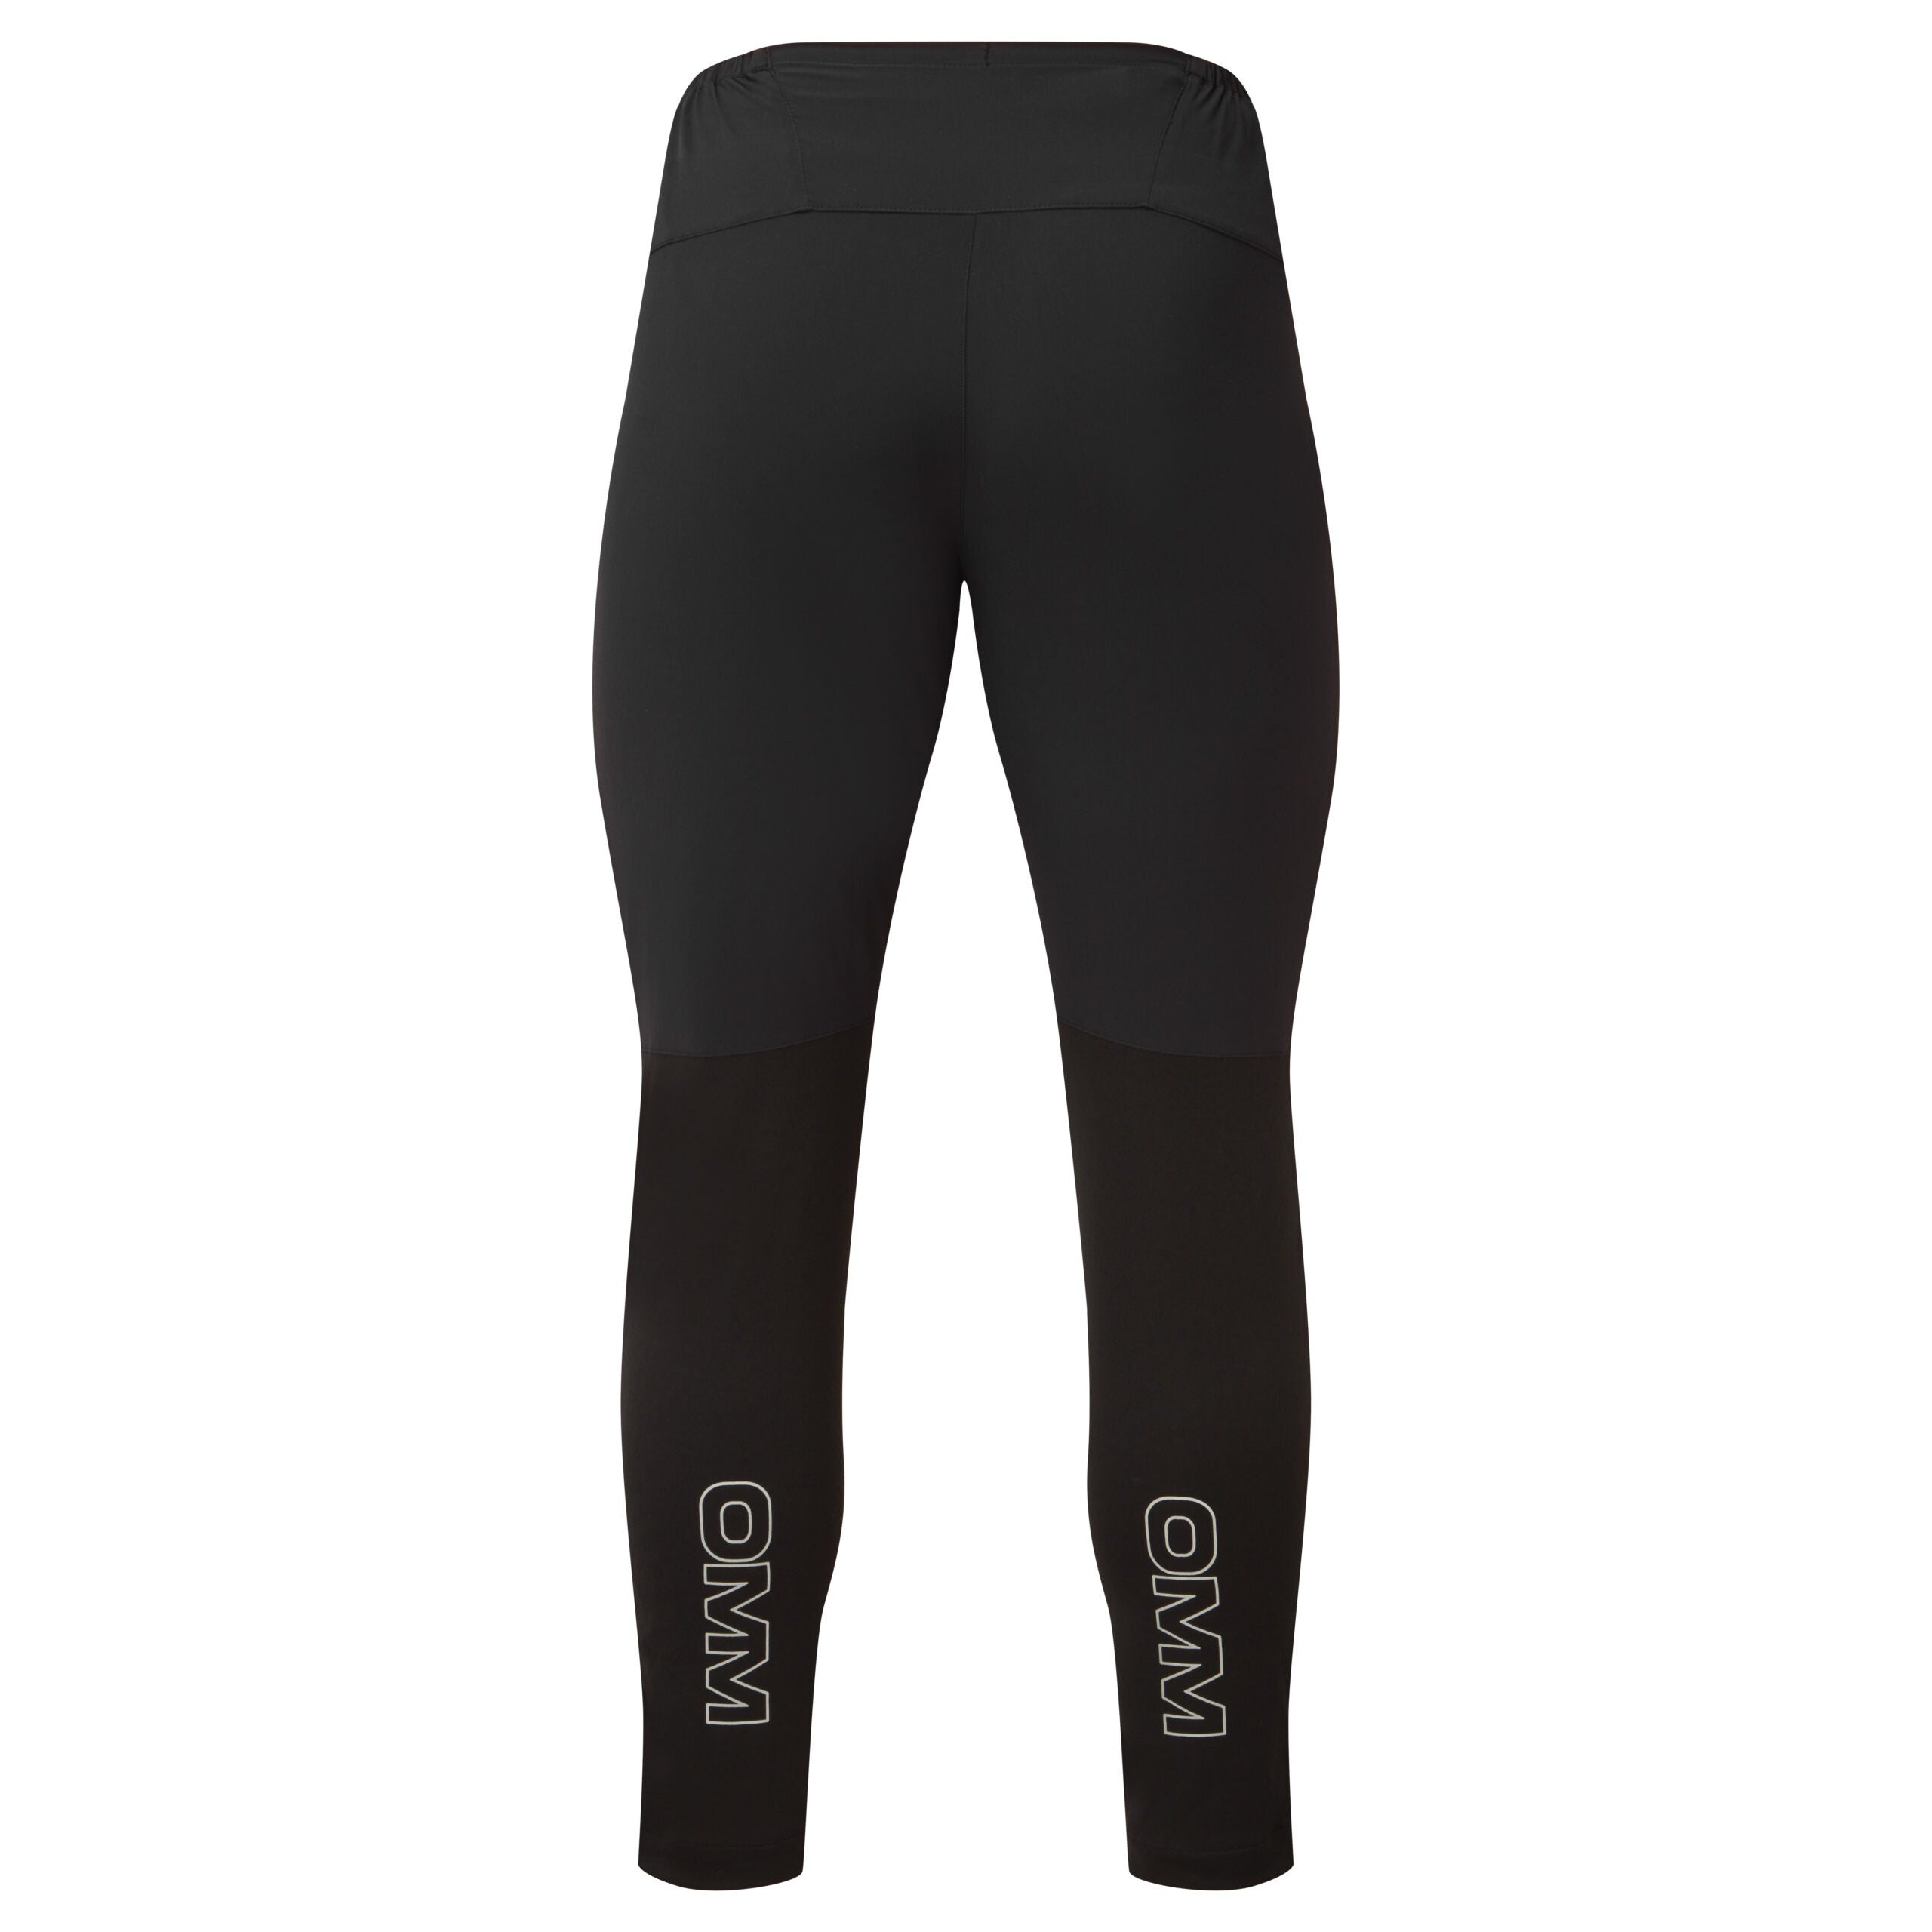 Pace Pant – OMM JAPAN OFFICIAL